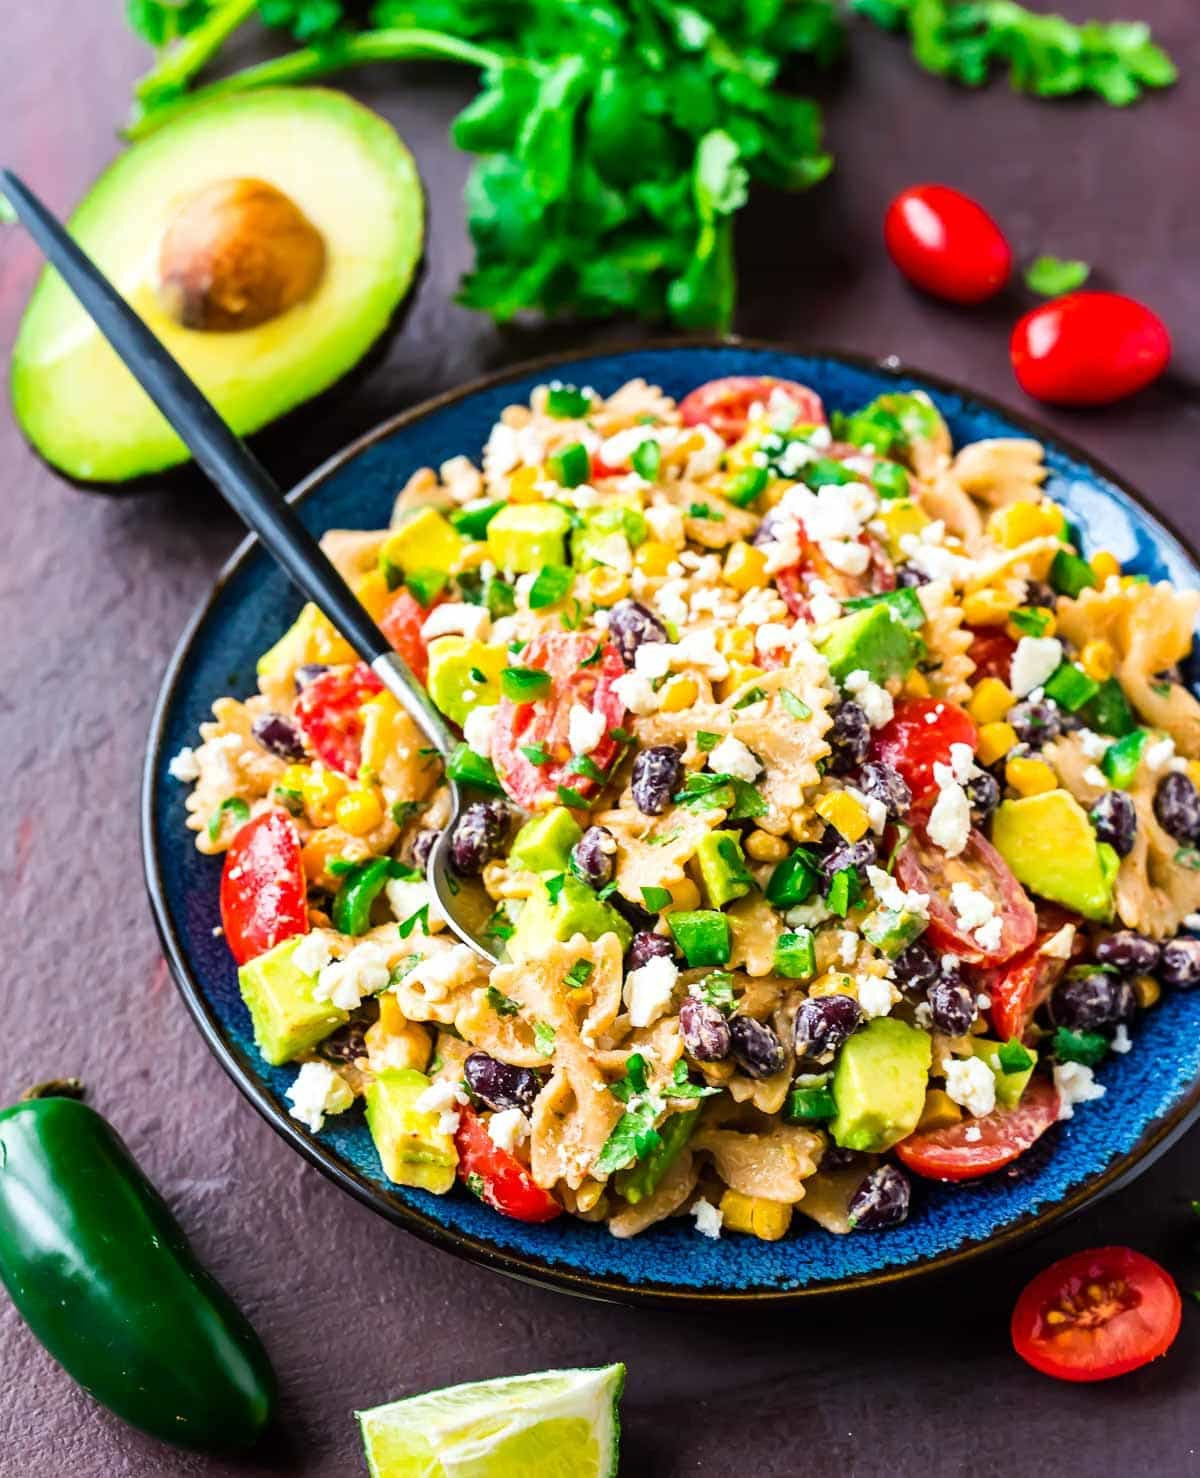 Healthy Mexican Salad Recipes
 Mexican Pasta Salad with Creamy Southwestern Dressing